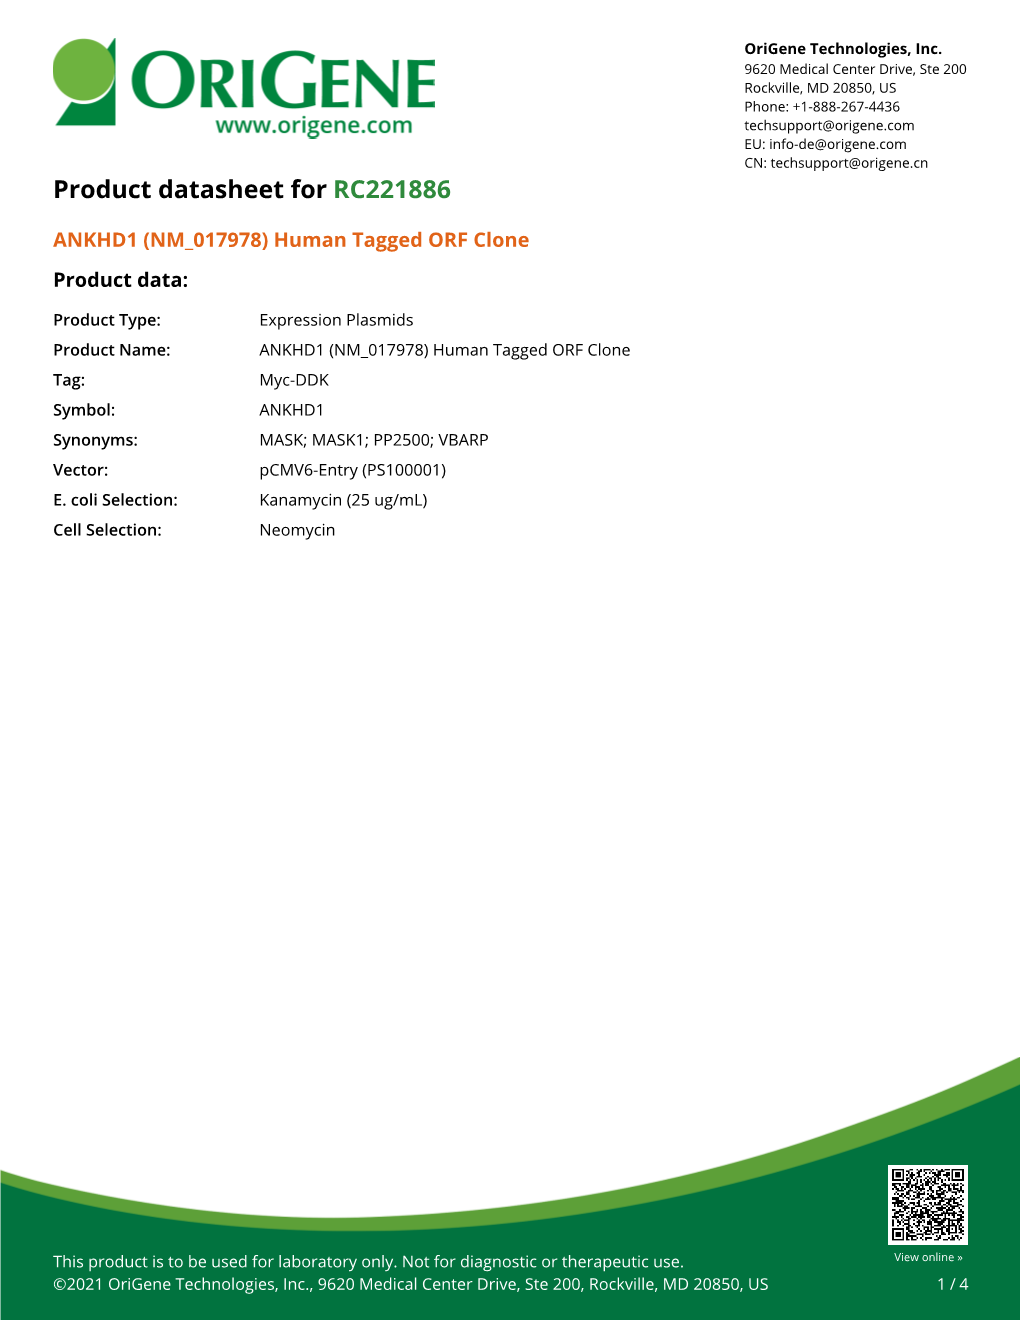 ANKHD1 (NM 017978) Human Tagged ORF Clone Product Data